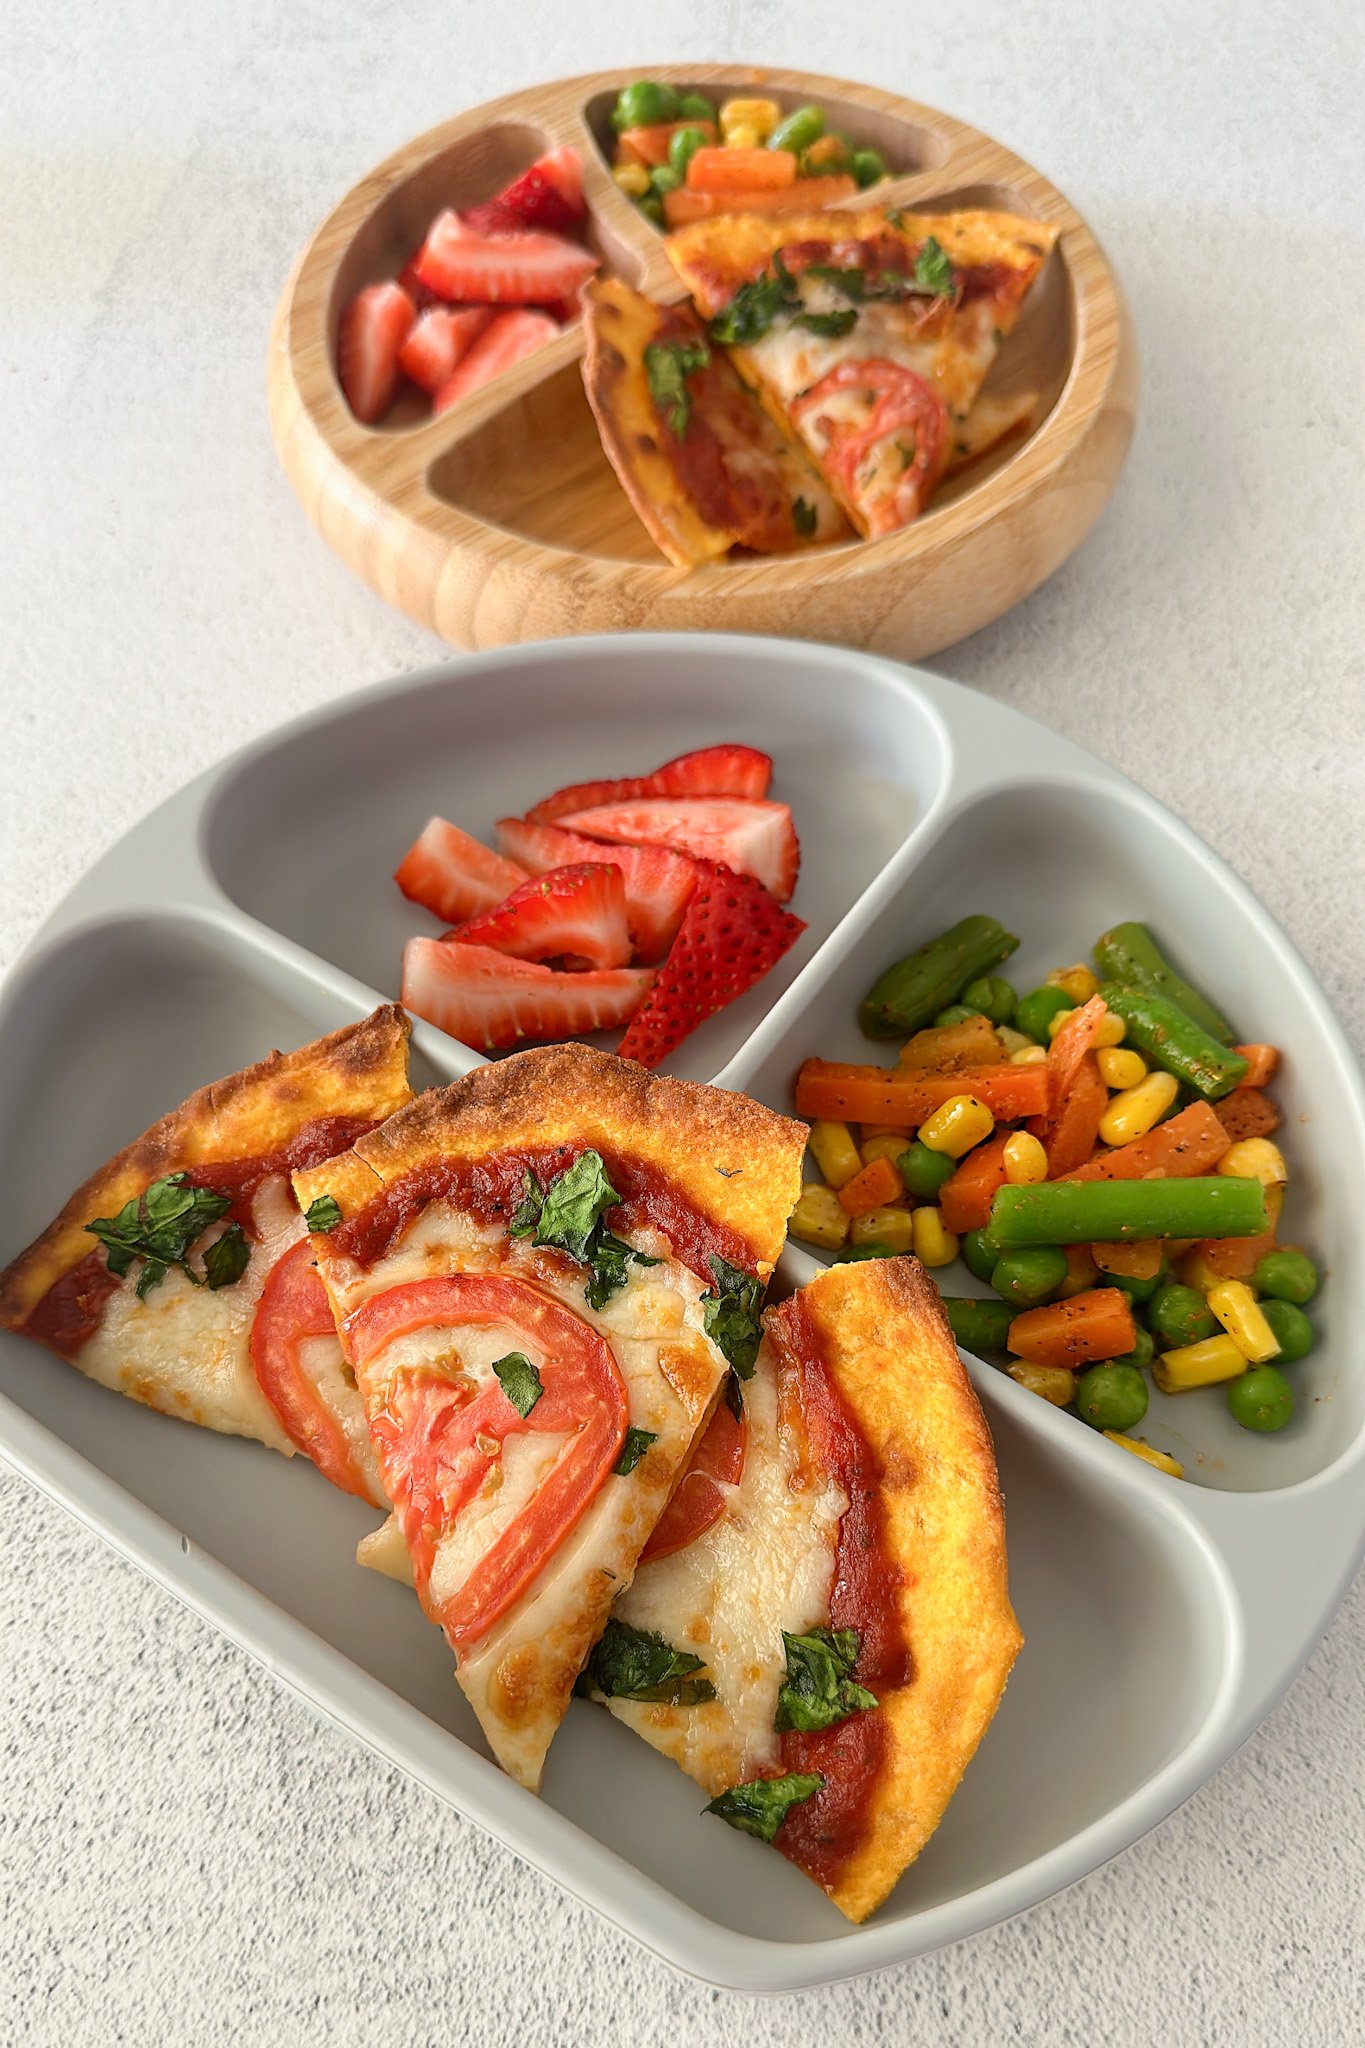 Air fryer tortilla pizza served with strawberries and sautéed veggies.